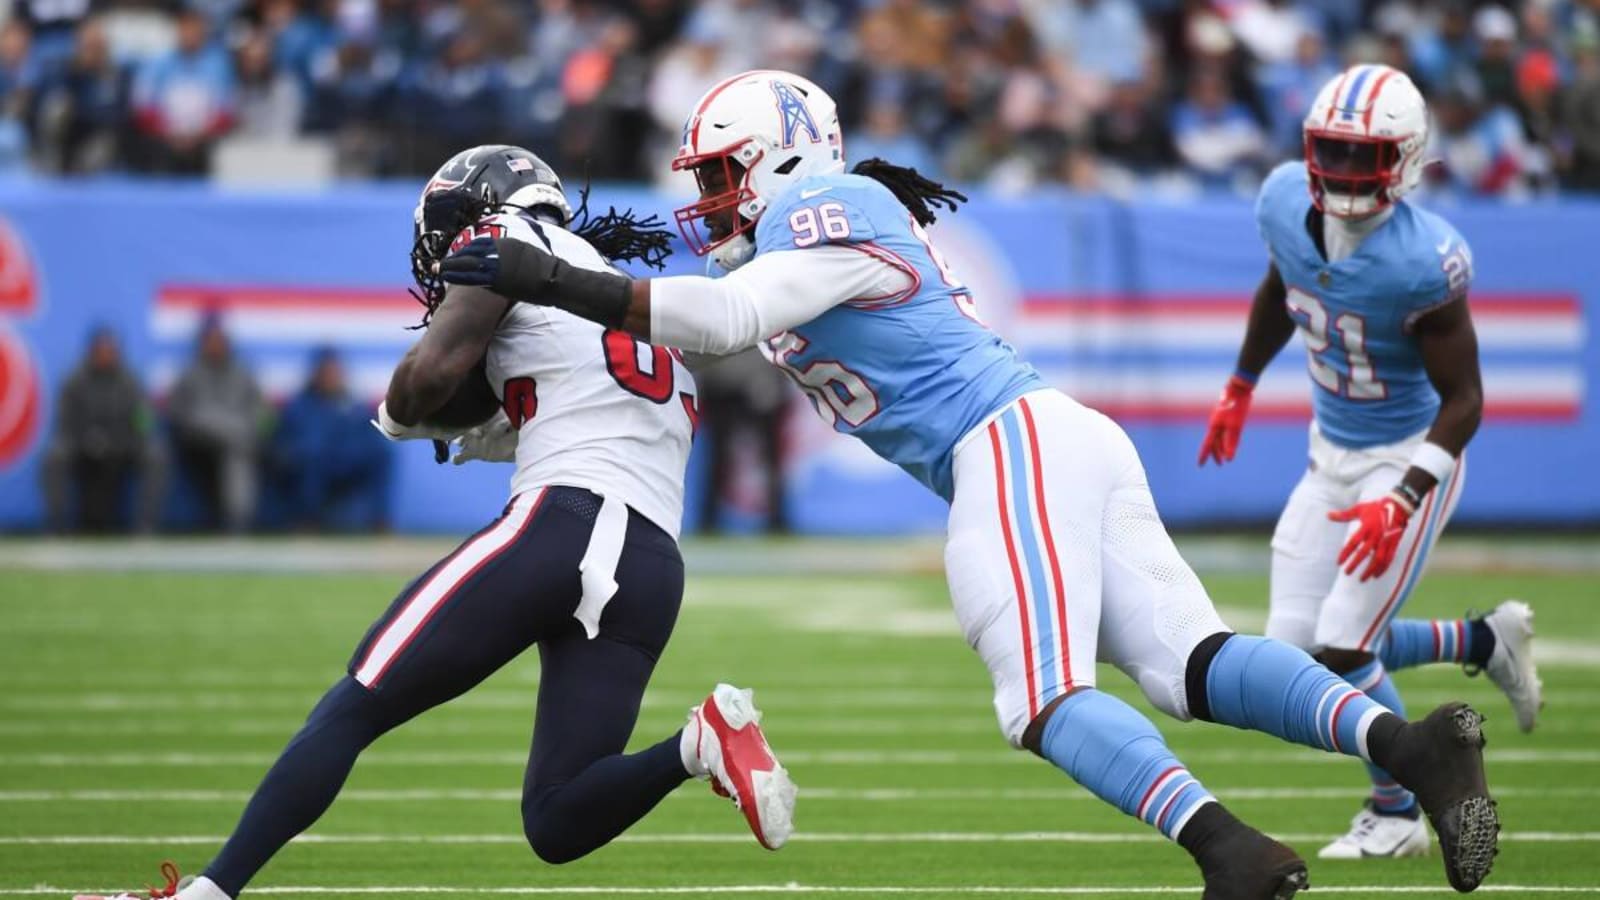 Watch: Denico Autry Gets Career-Best 10th Sack of Season As Titans Lead Houston Texans Late